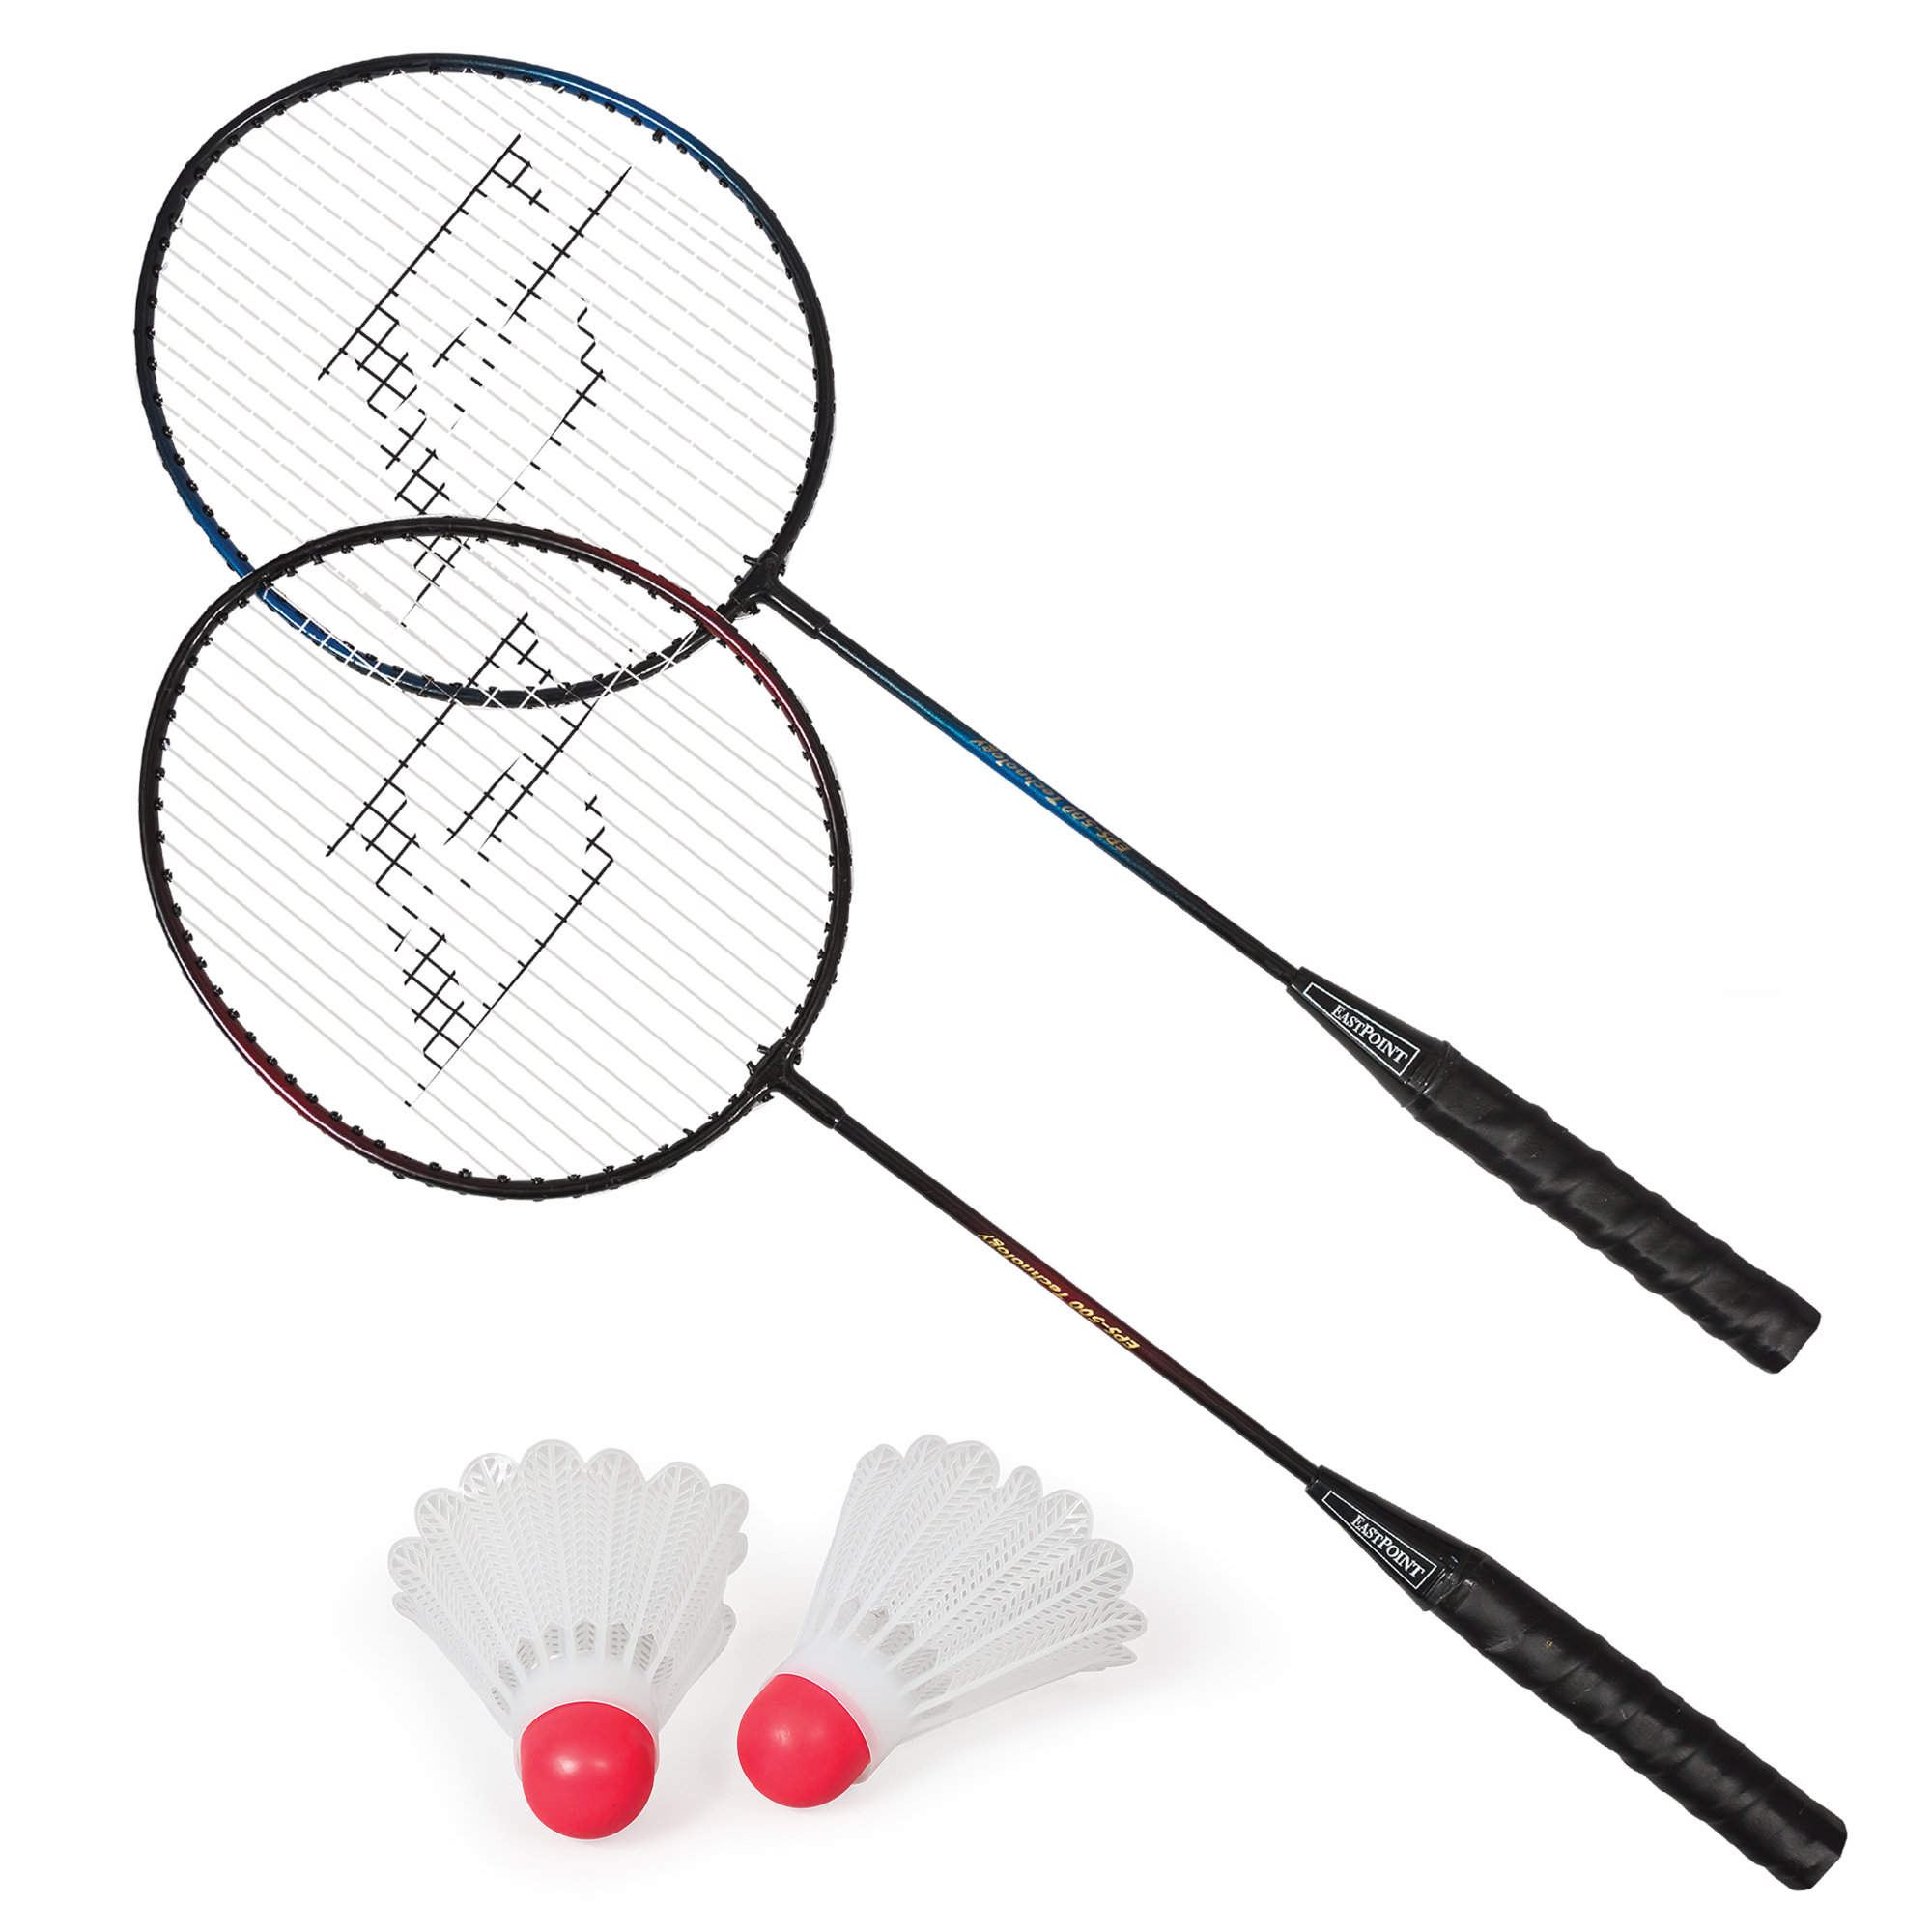 EastPoint Sports 2 Player Badminton Racket Set; Contains 2 Rackets with Tempered Steel Shafts, Comfort Handles and 2 Durable, White Shuttlecock Birdies - image 1 of 7